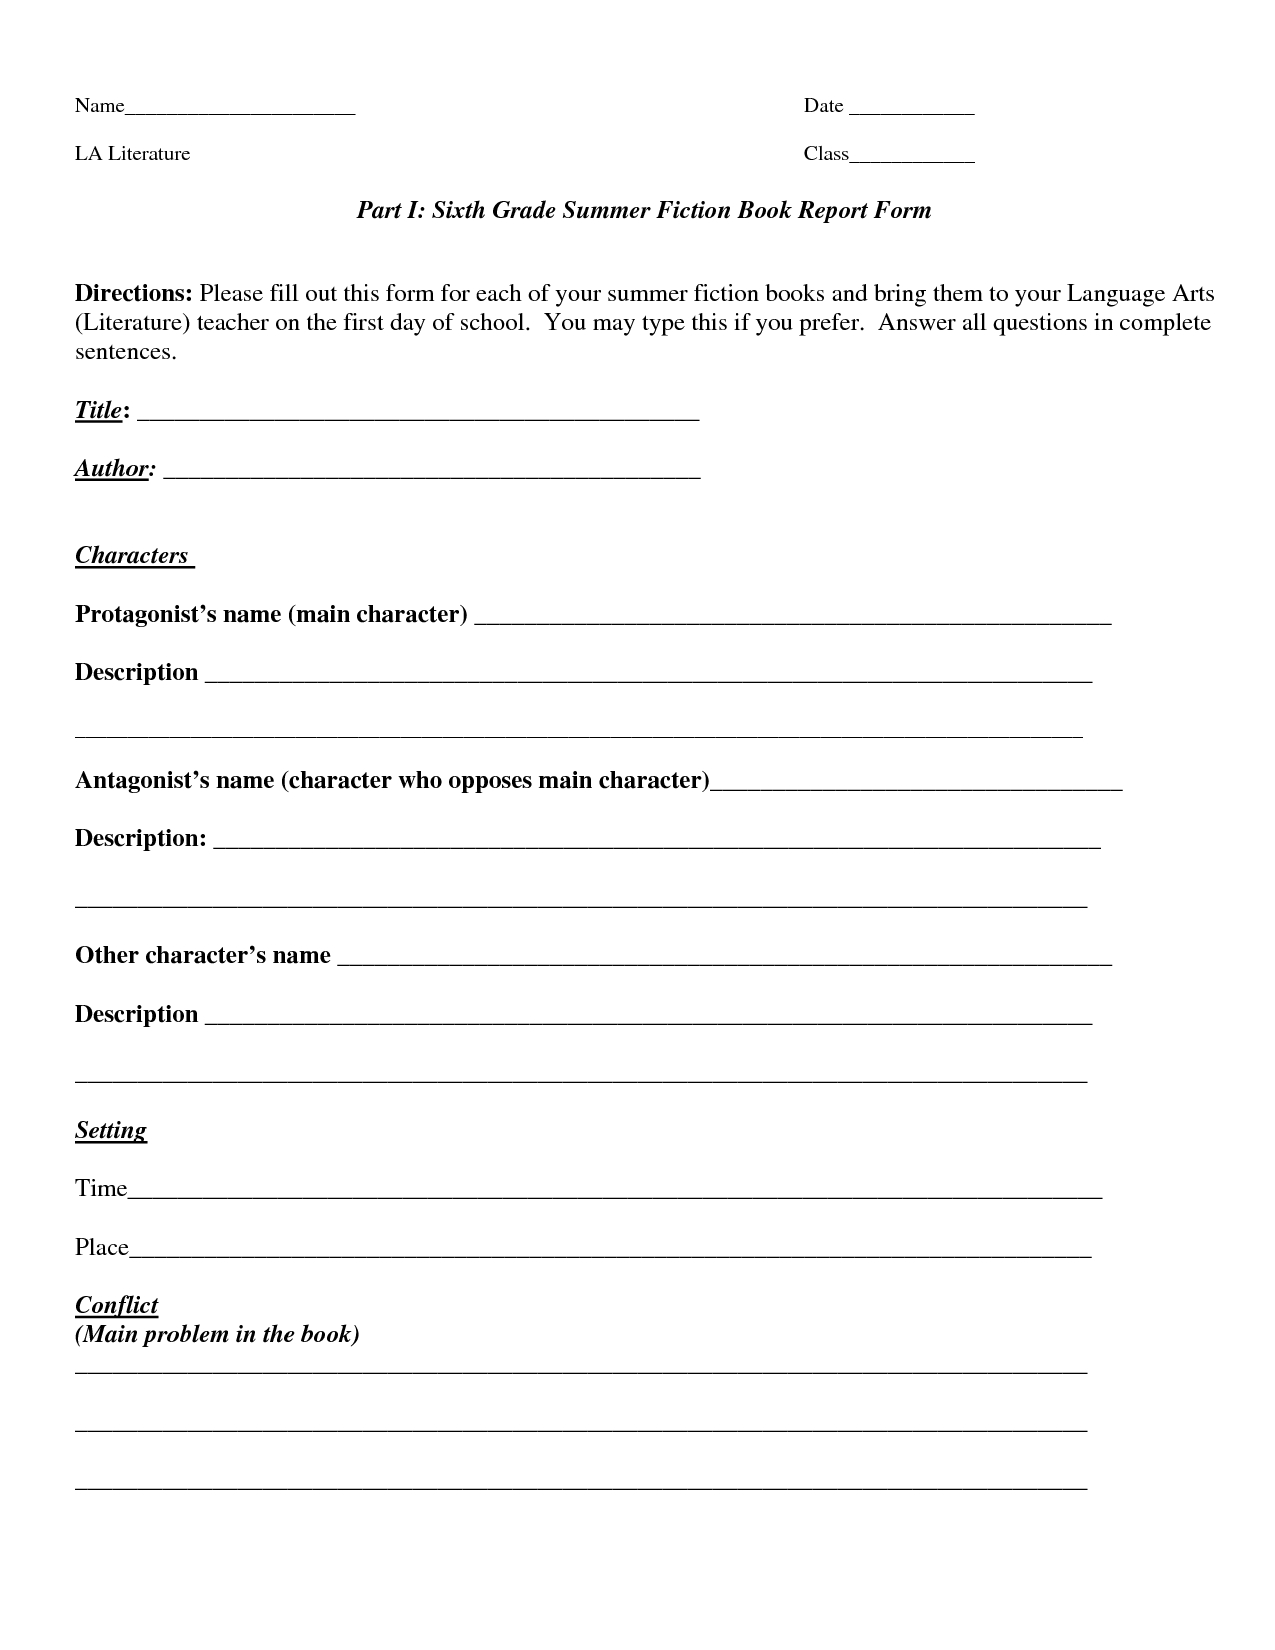 Book Report Template | Part I Sixth Grade Summer Fiction With Regard To Book Report Template Grade 1